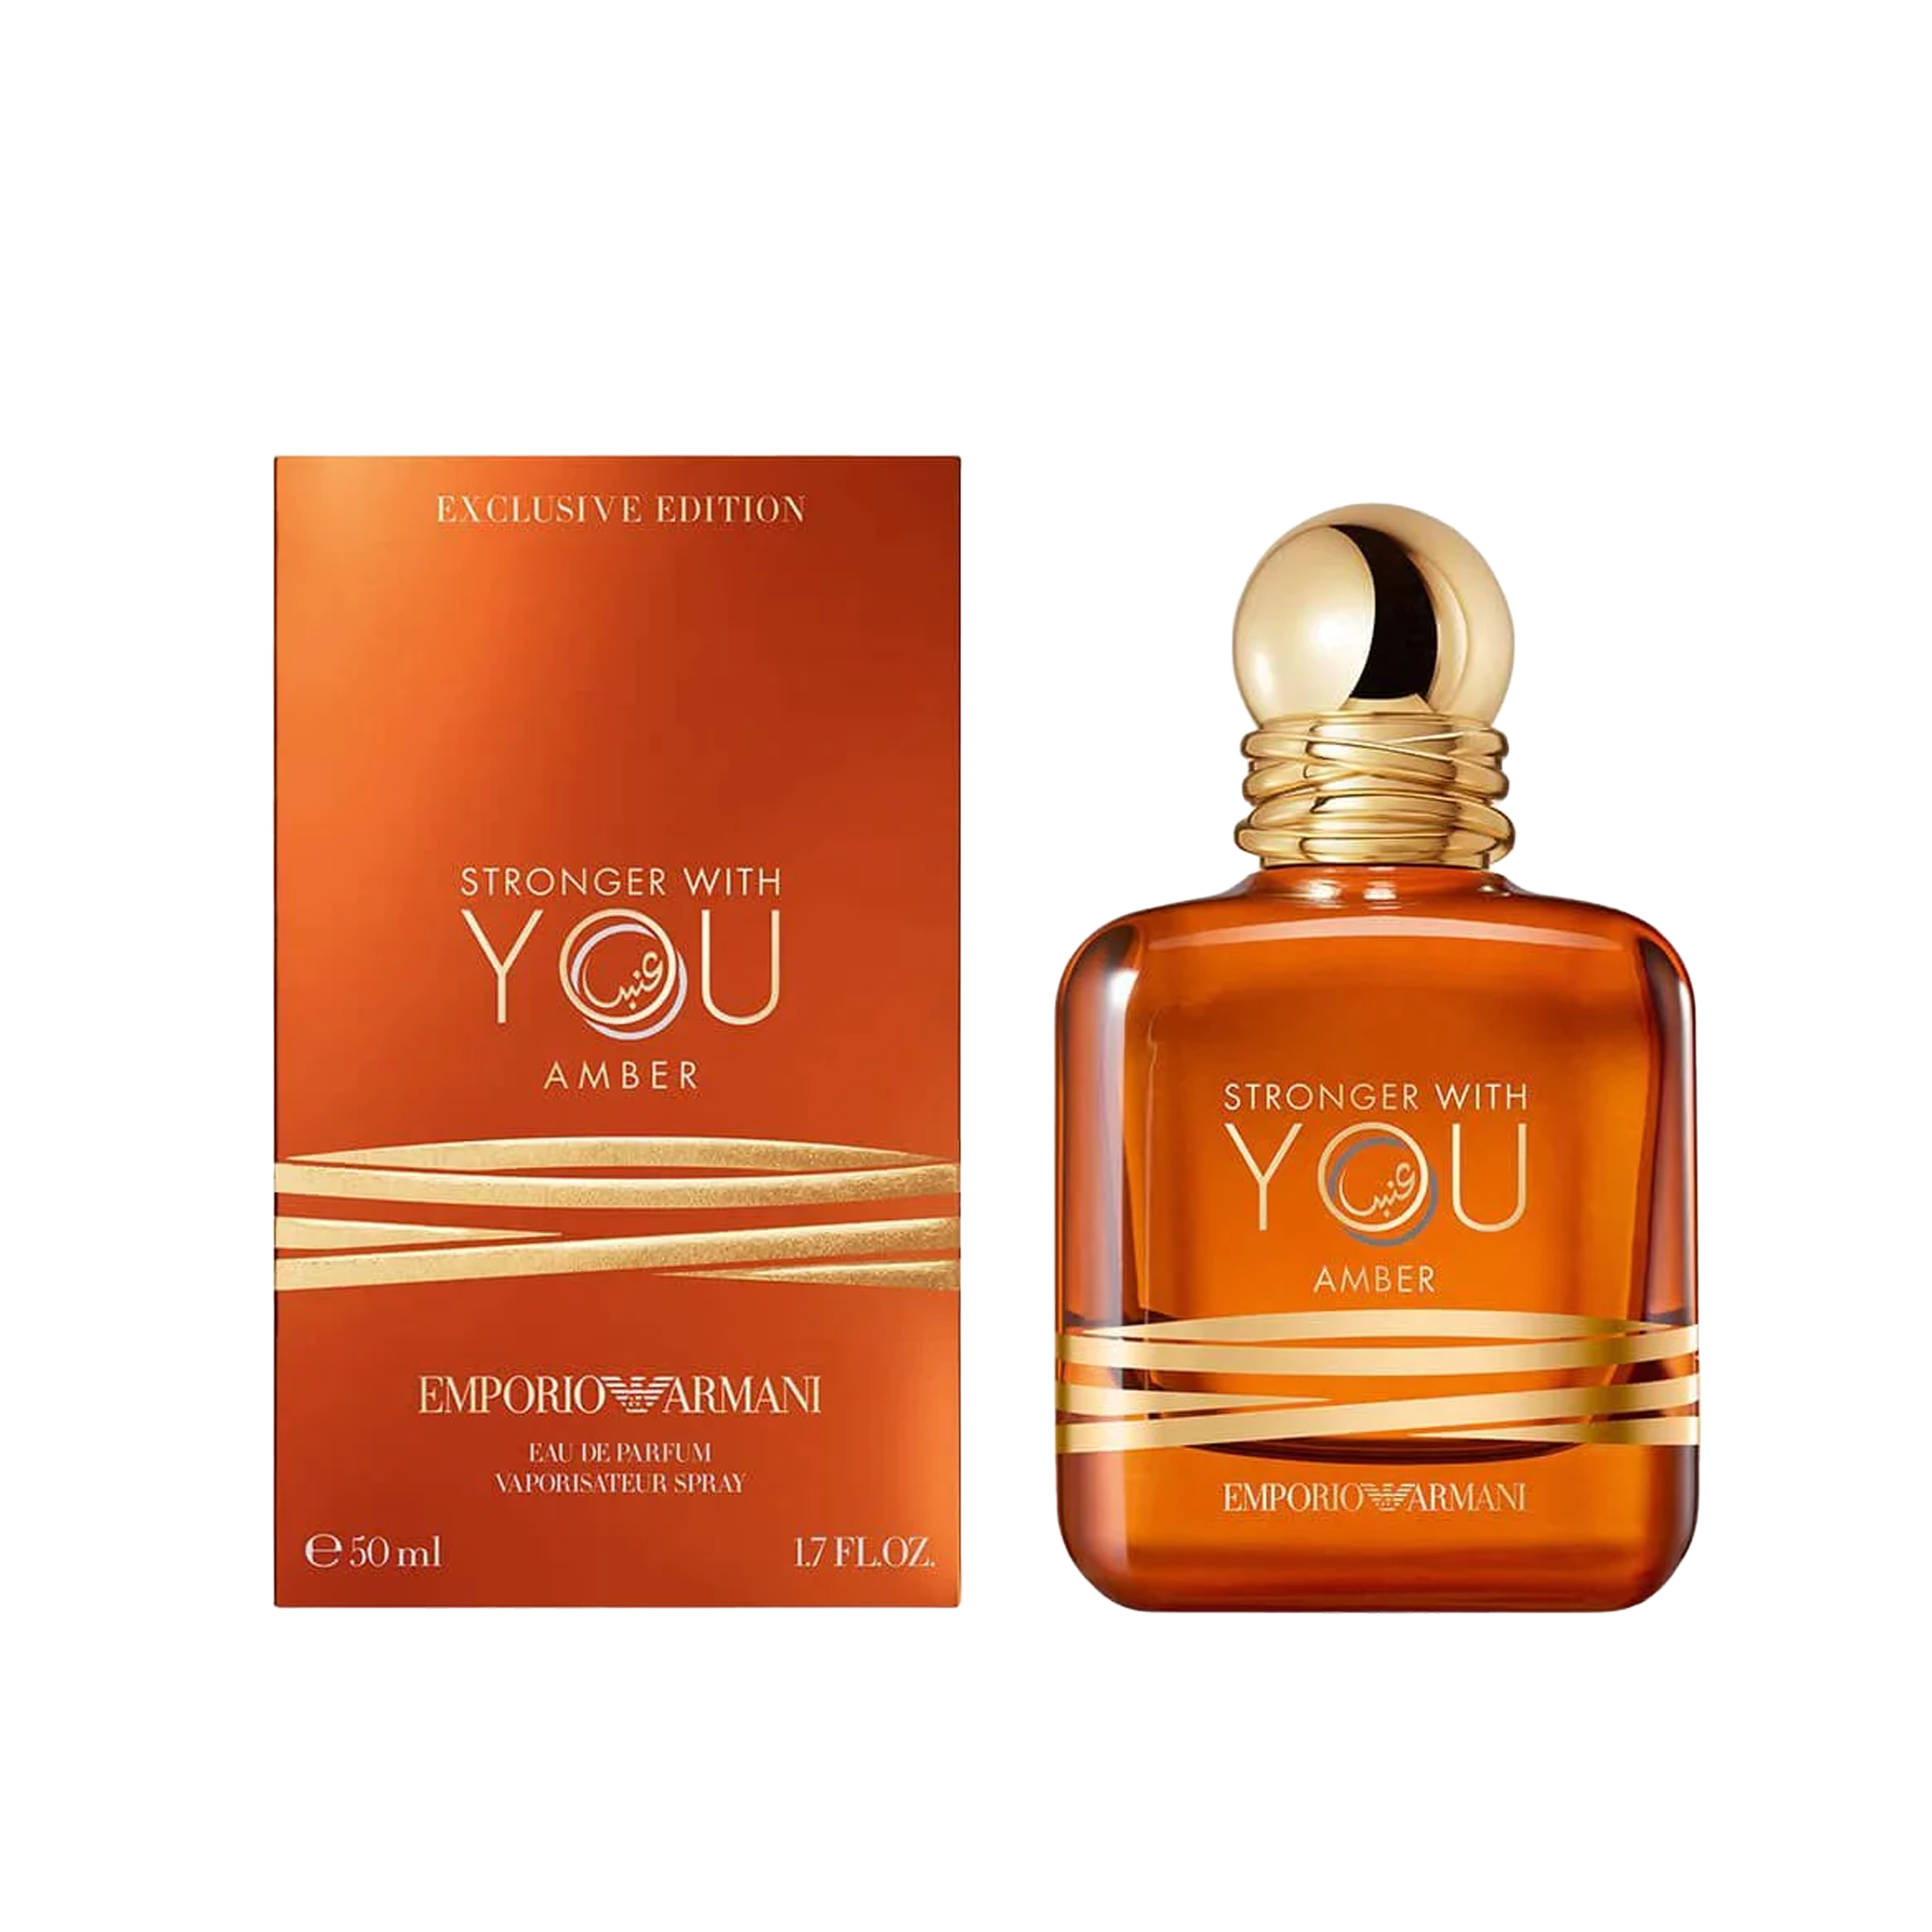 Armani (Emporio Armani) Stronger With You Amber Exclusive Edition EDP 100ml